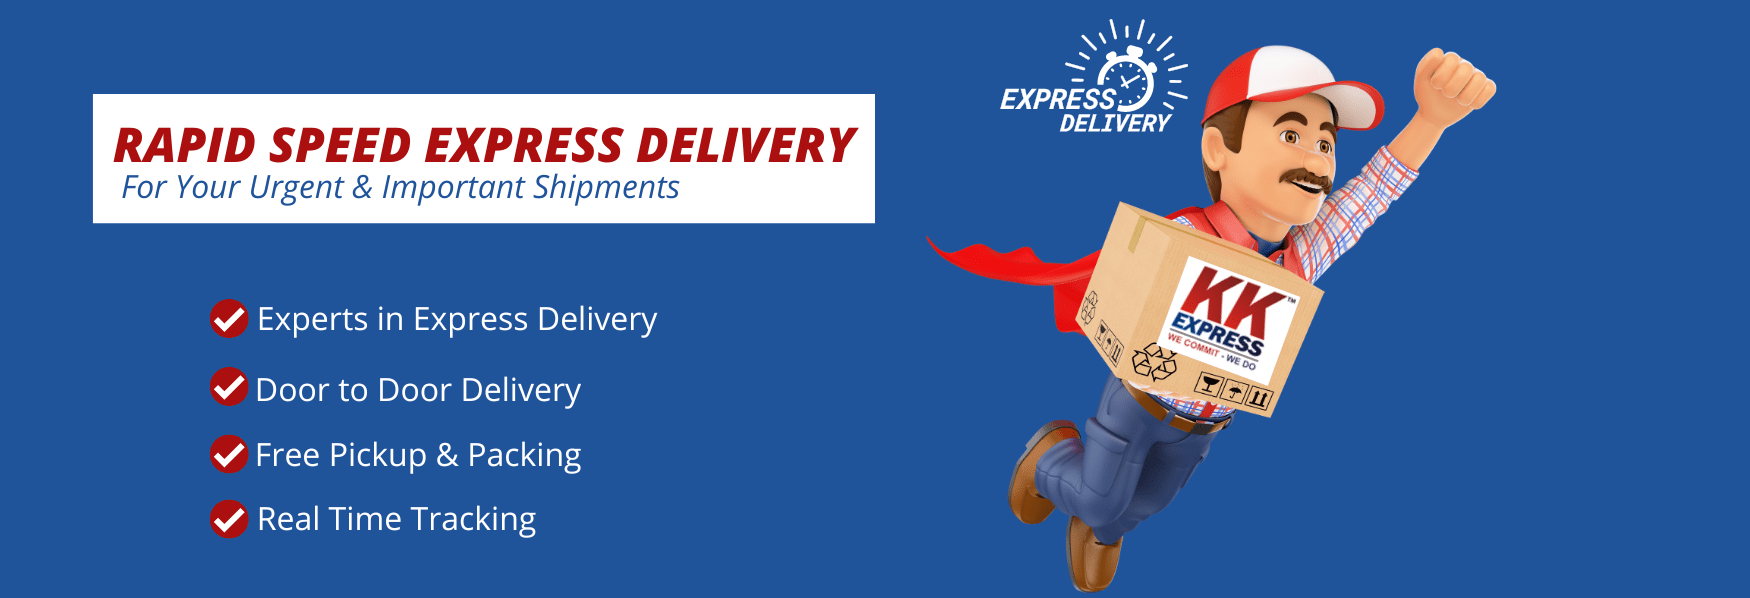 Rapid Speed Express Delivery